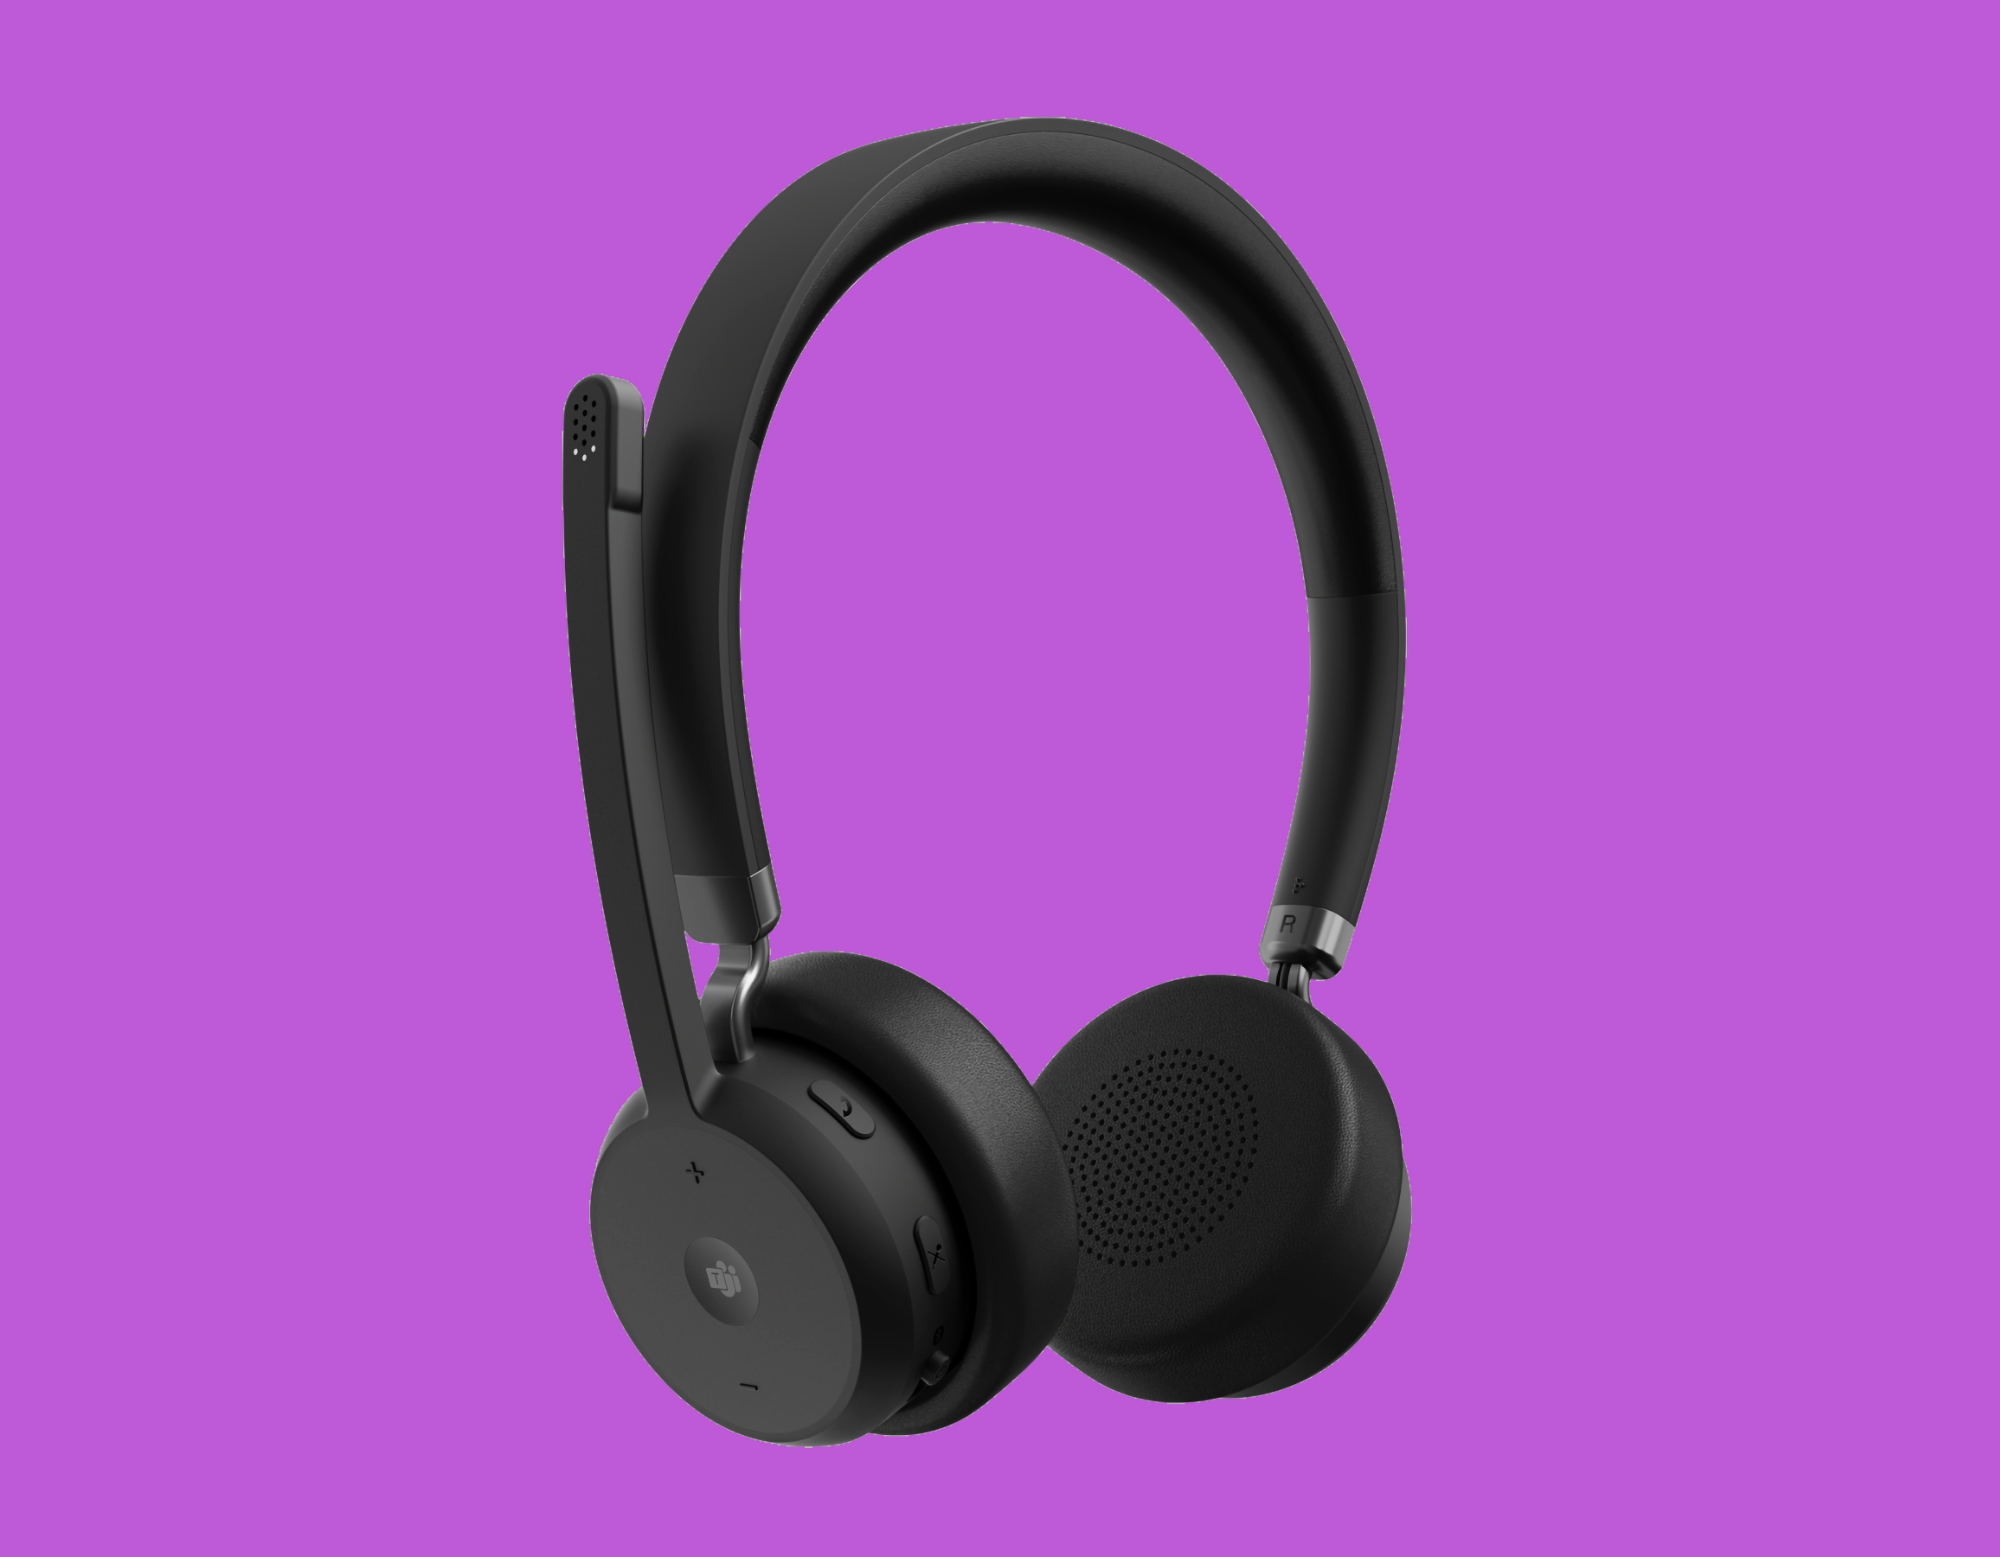 Lenovo introduced Wireless VoIP: a headset with Microsoft Teams certification and up to 30 hours of battery life